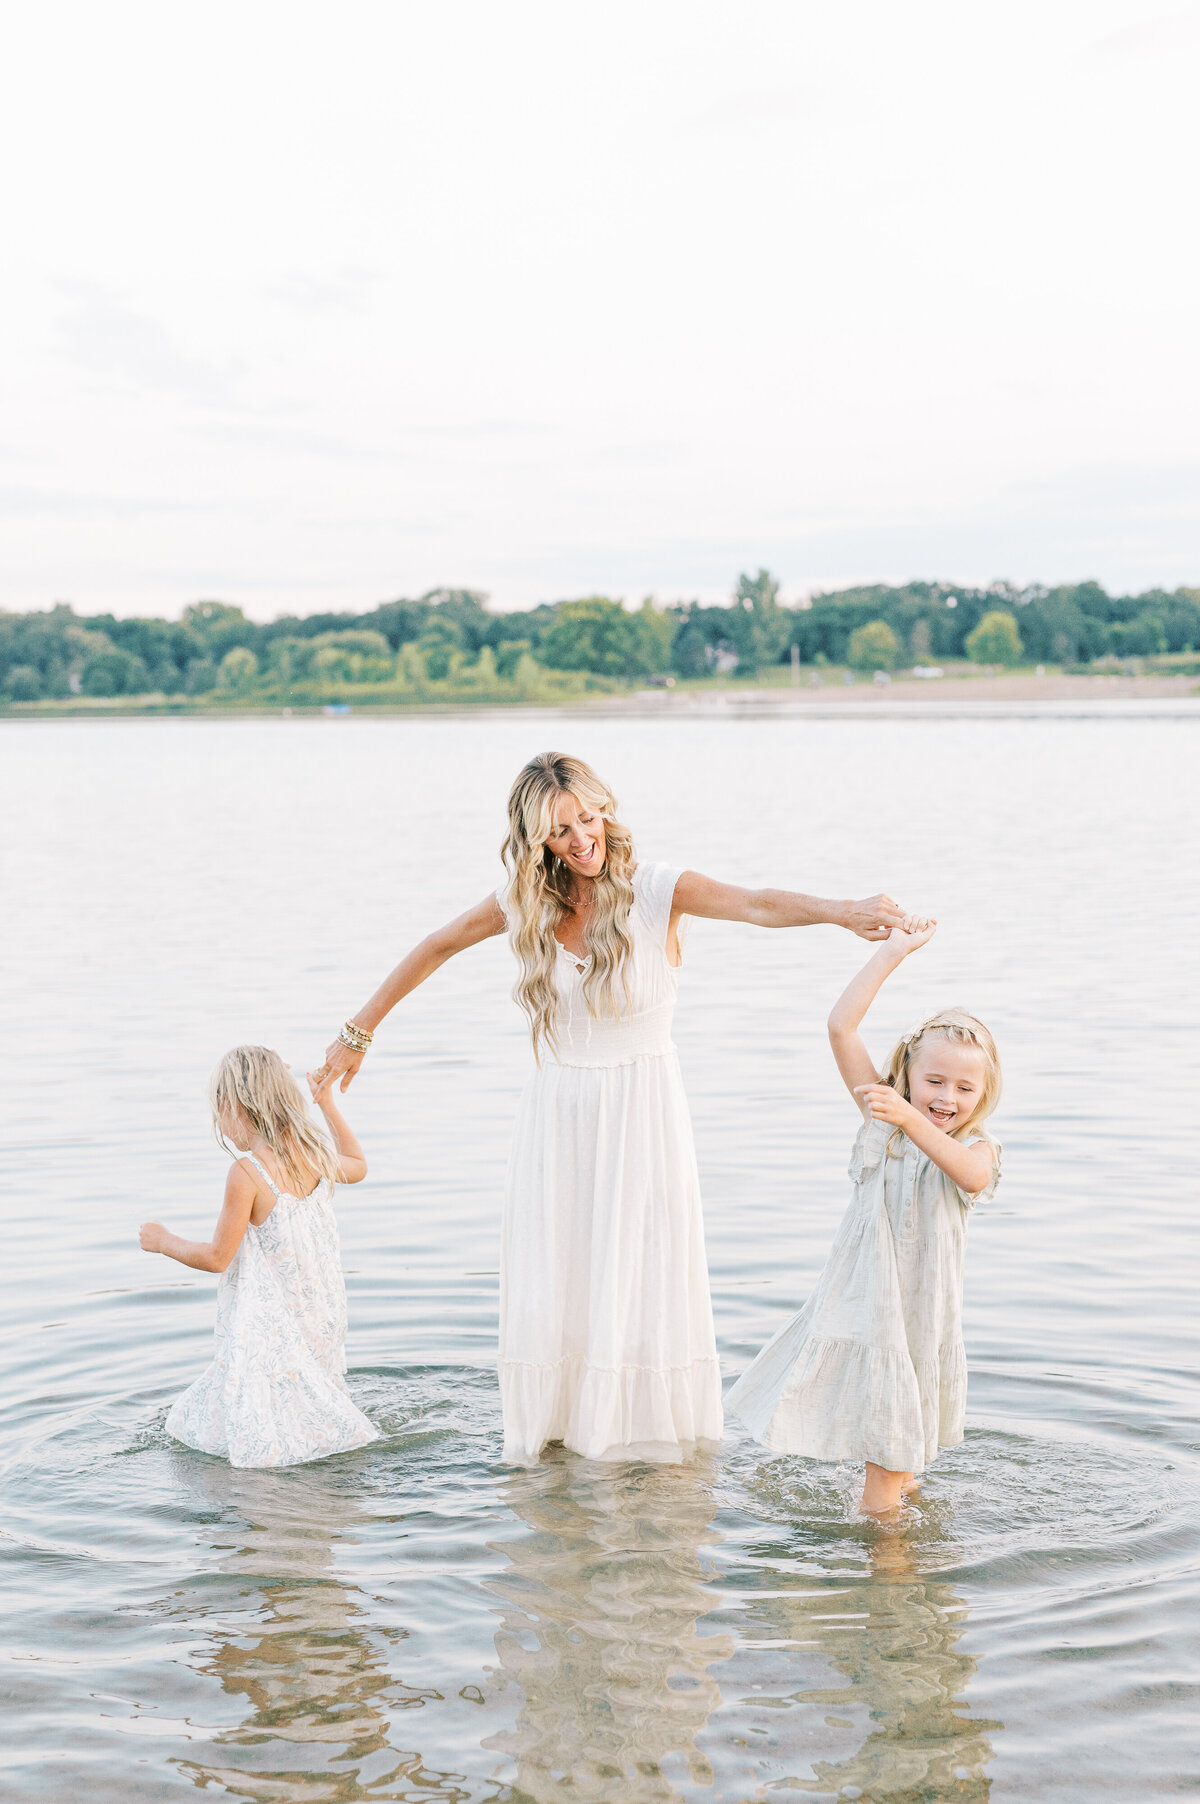 Mom twirling daughter's in water at sunset